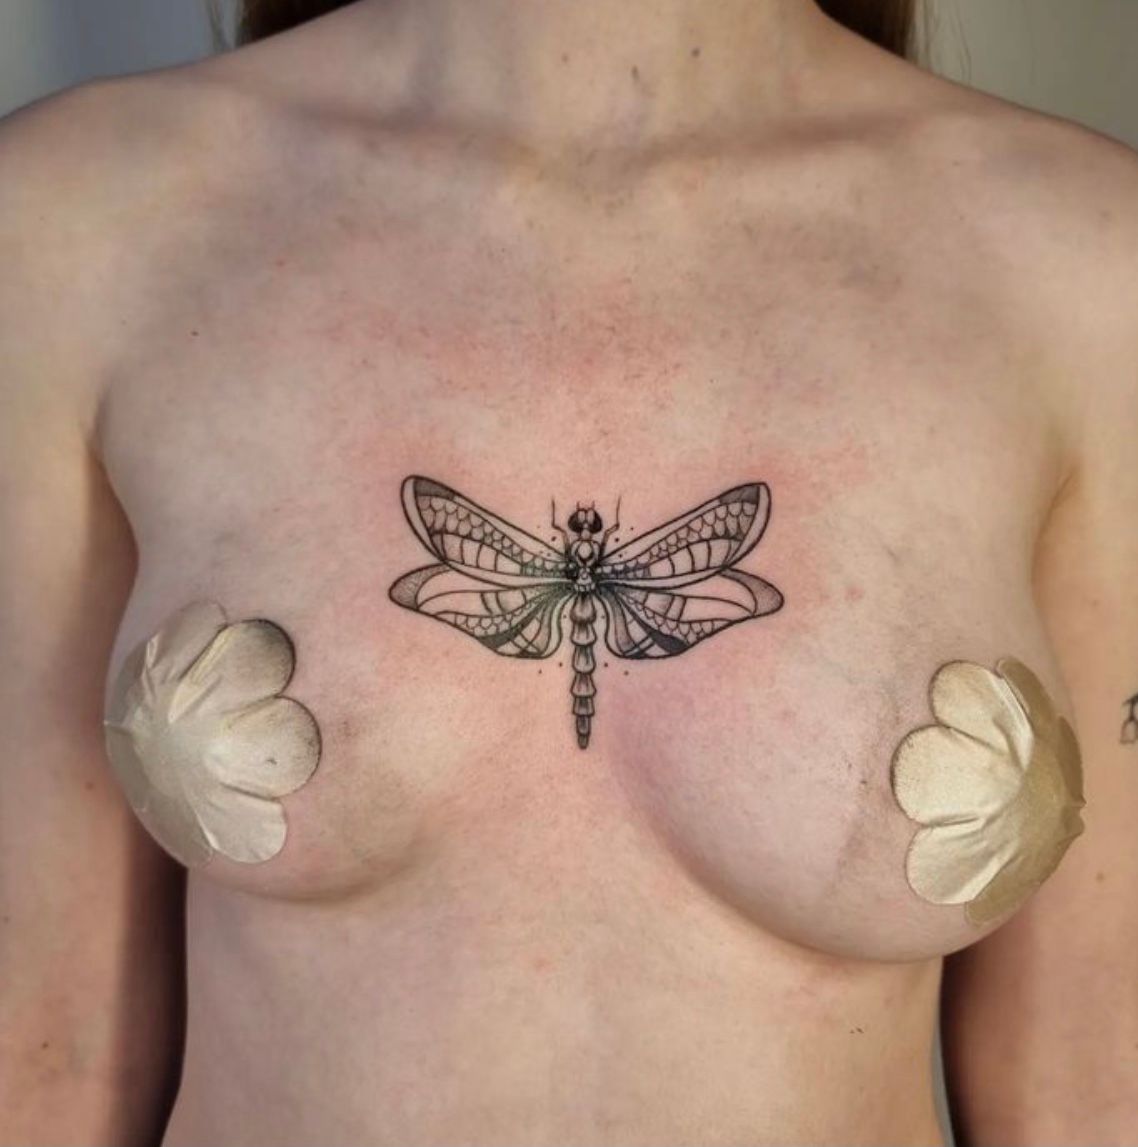 Tattoo tagged with splatter chest dragonfly  inkedappcom